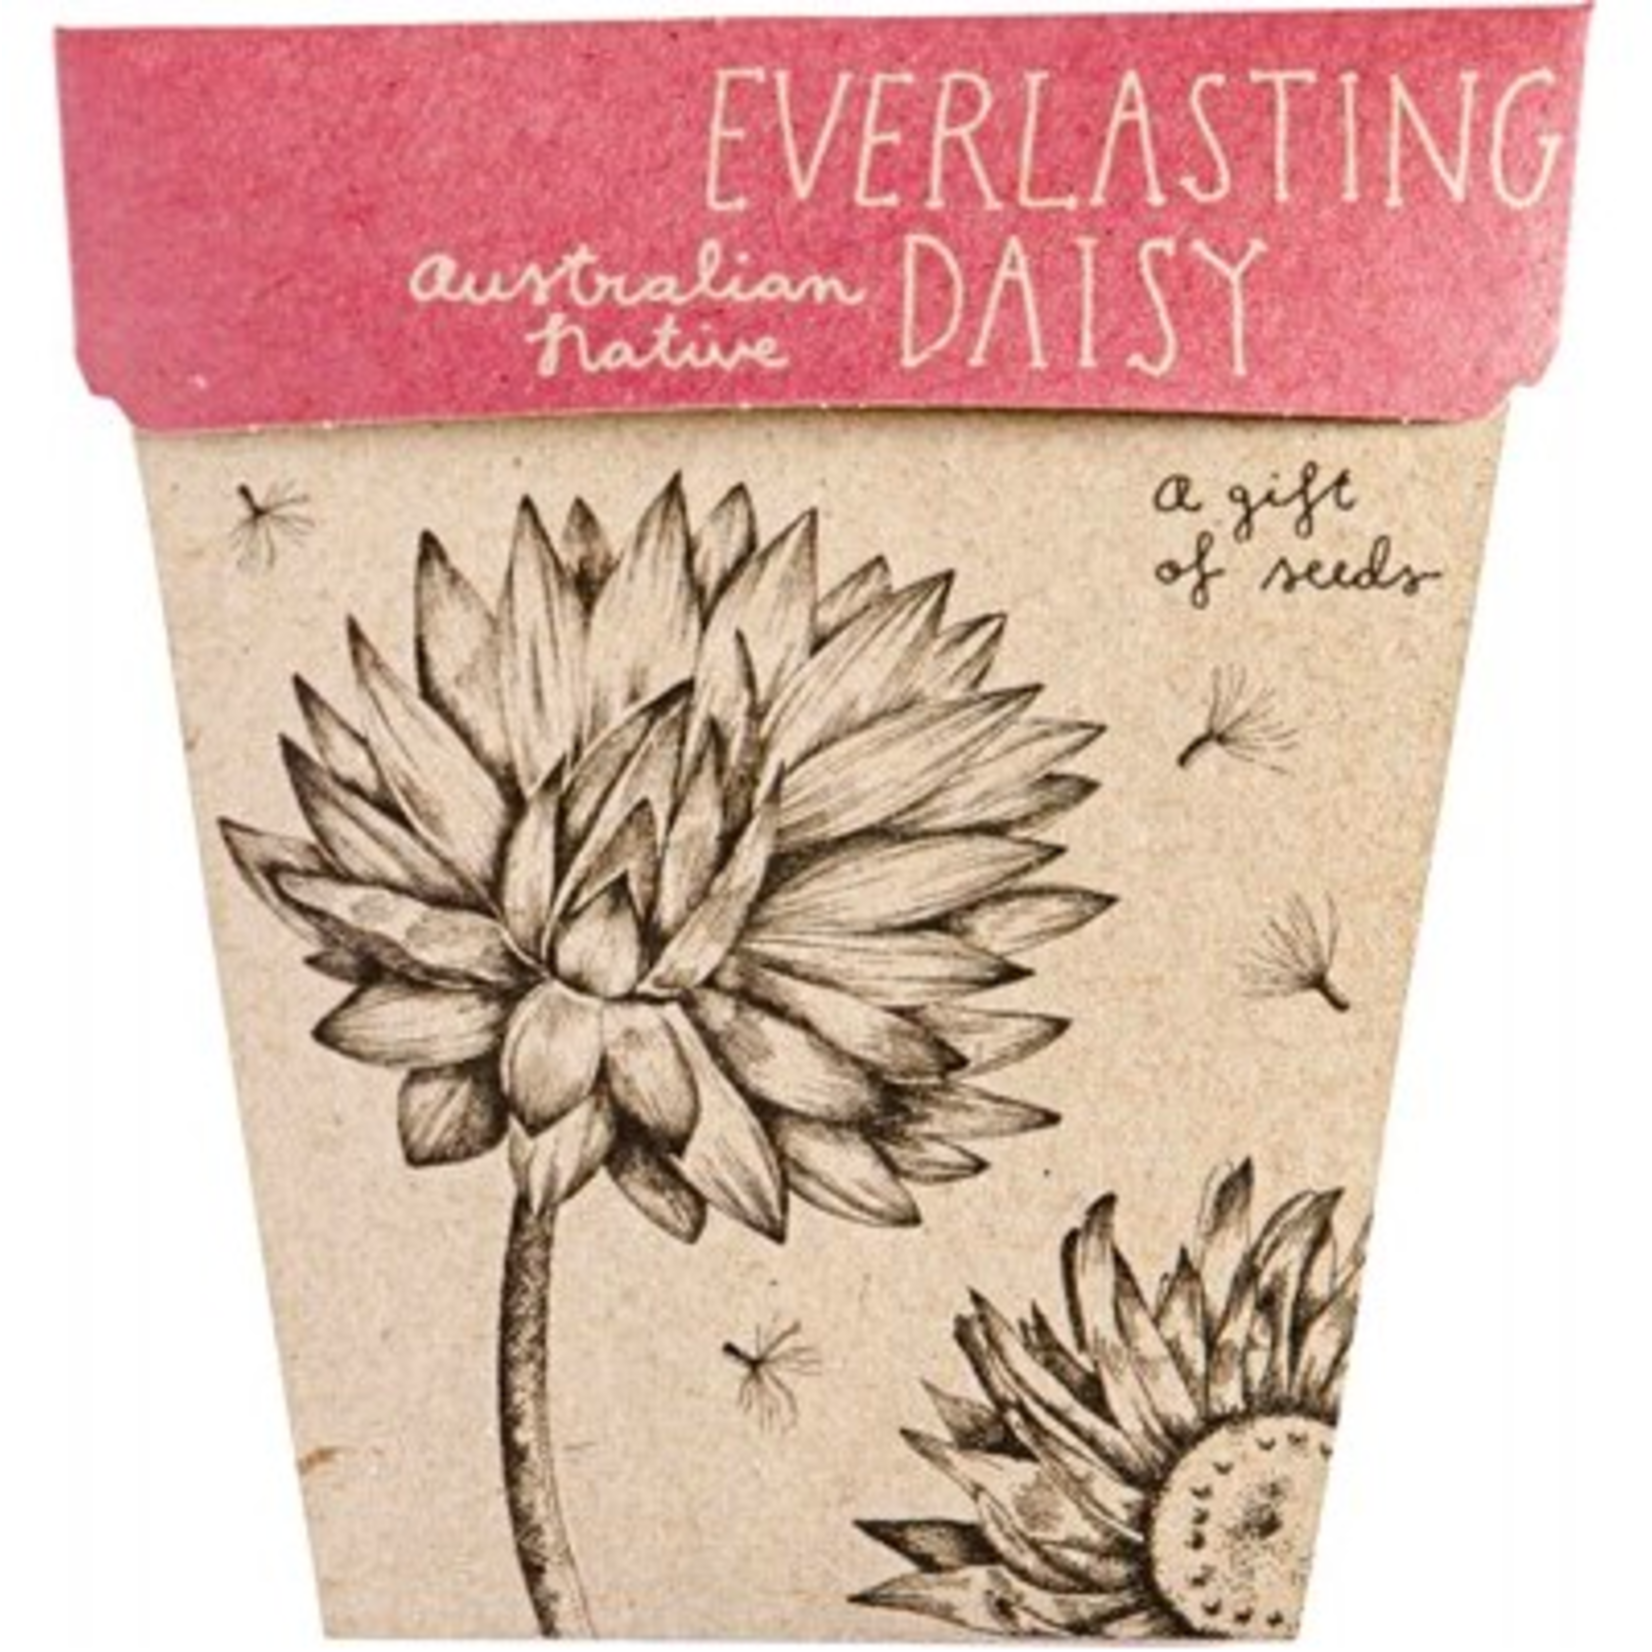 Sow 'n Sow Sow 'N Sow Gift of Seeds Everlasting Daisy